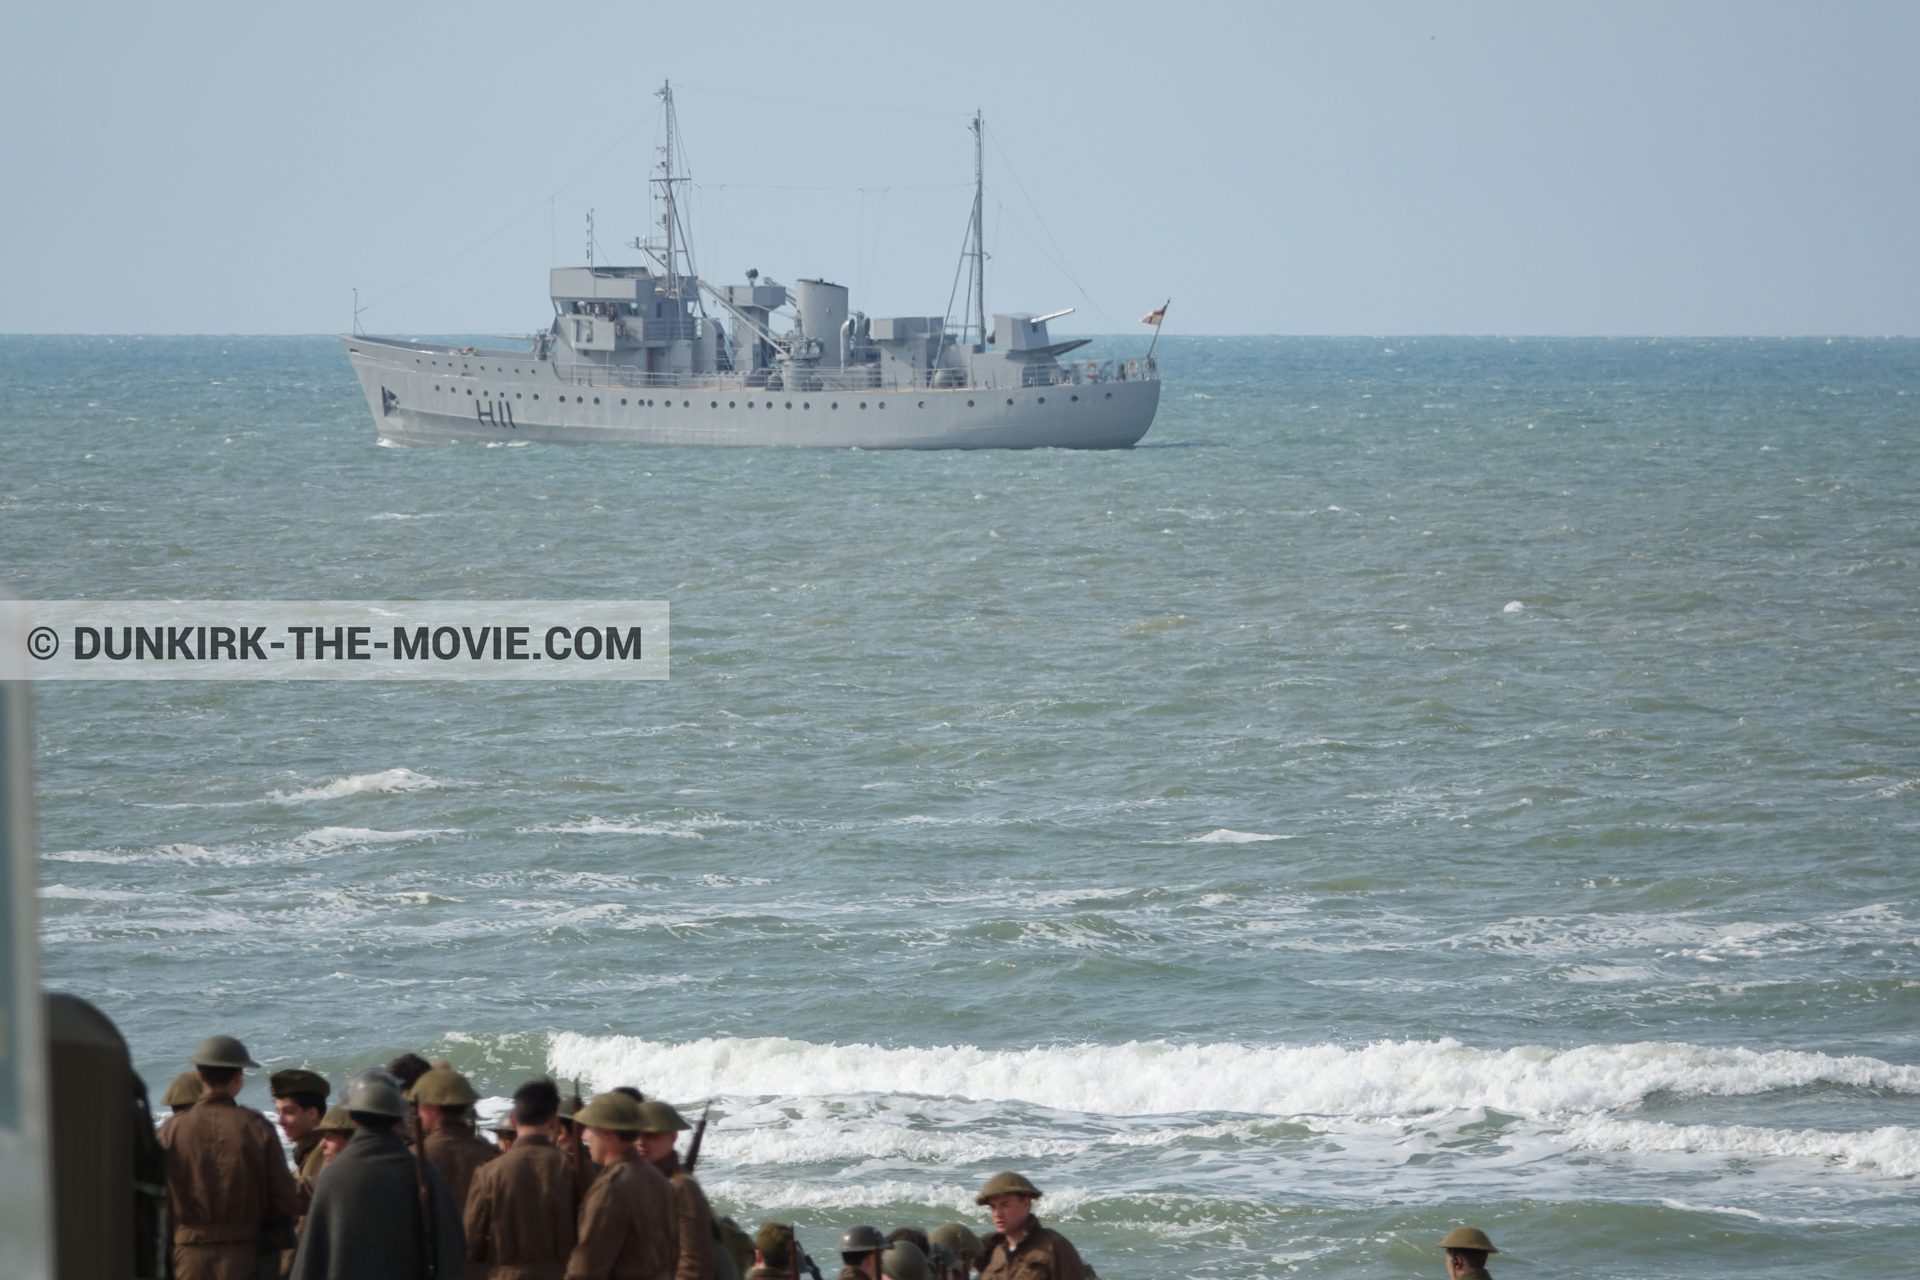 Picture with boat, supernumeraries, rough sea,  from behind the scene of the Dunkirk movie by Nolan